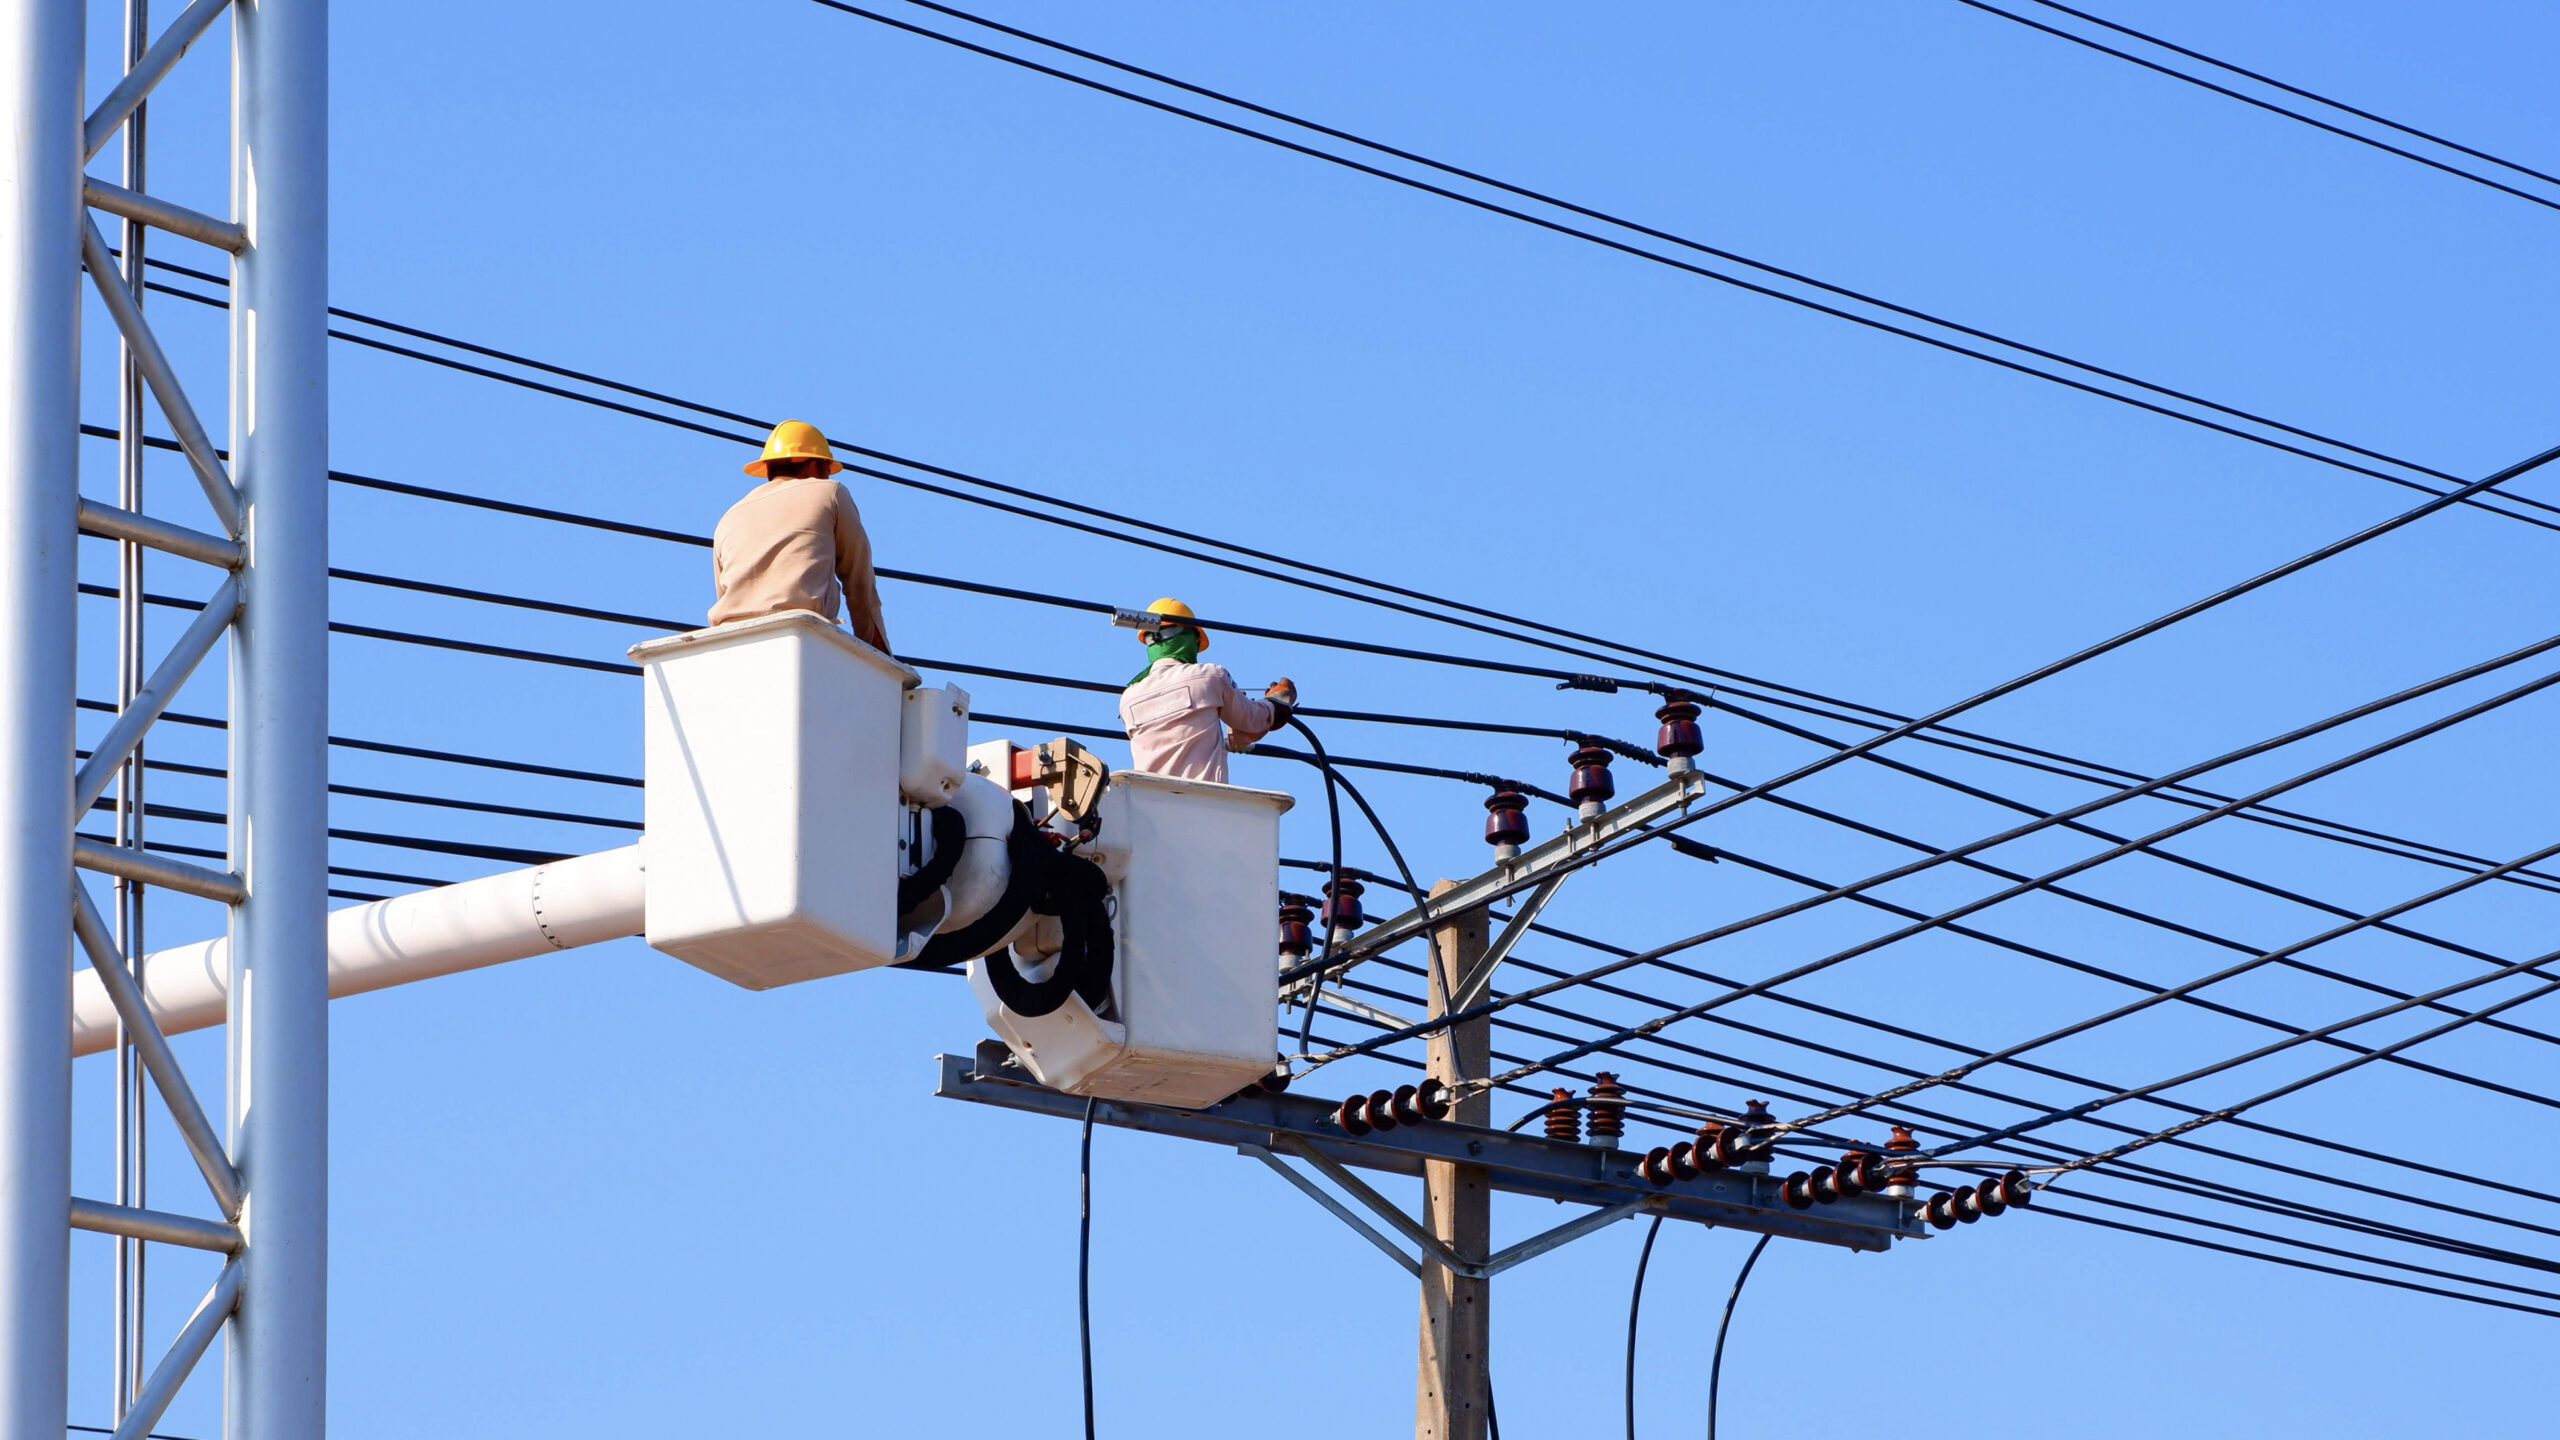 Electric grid pylon workers